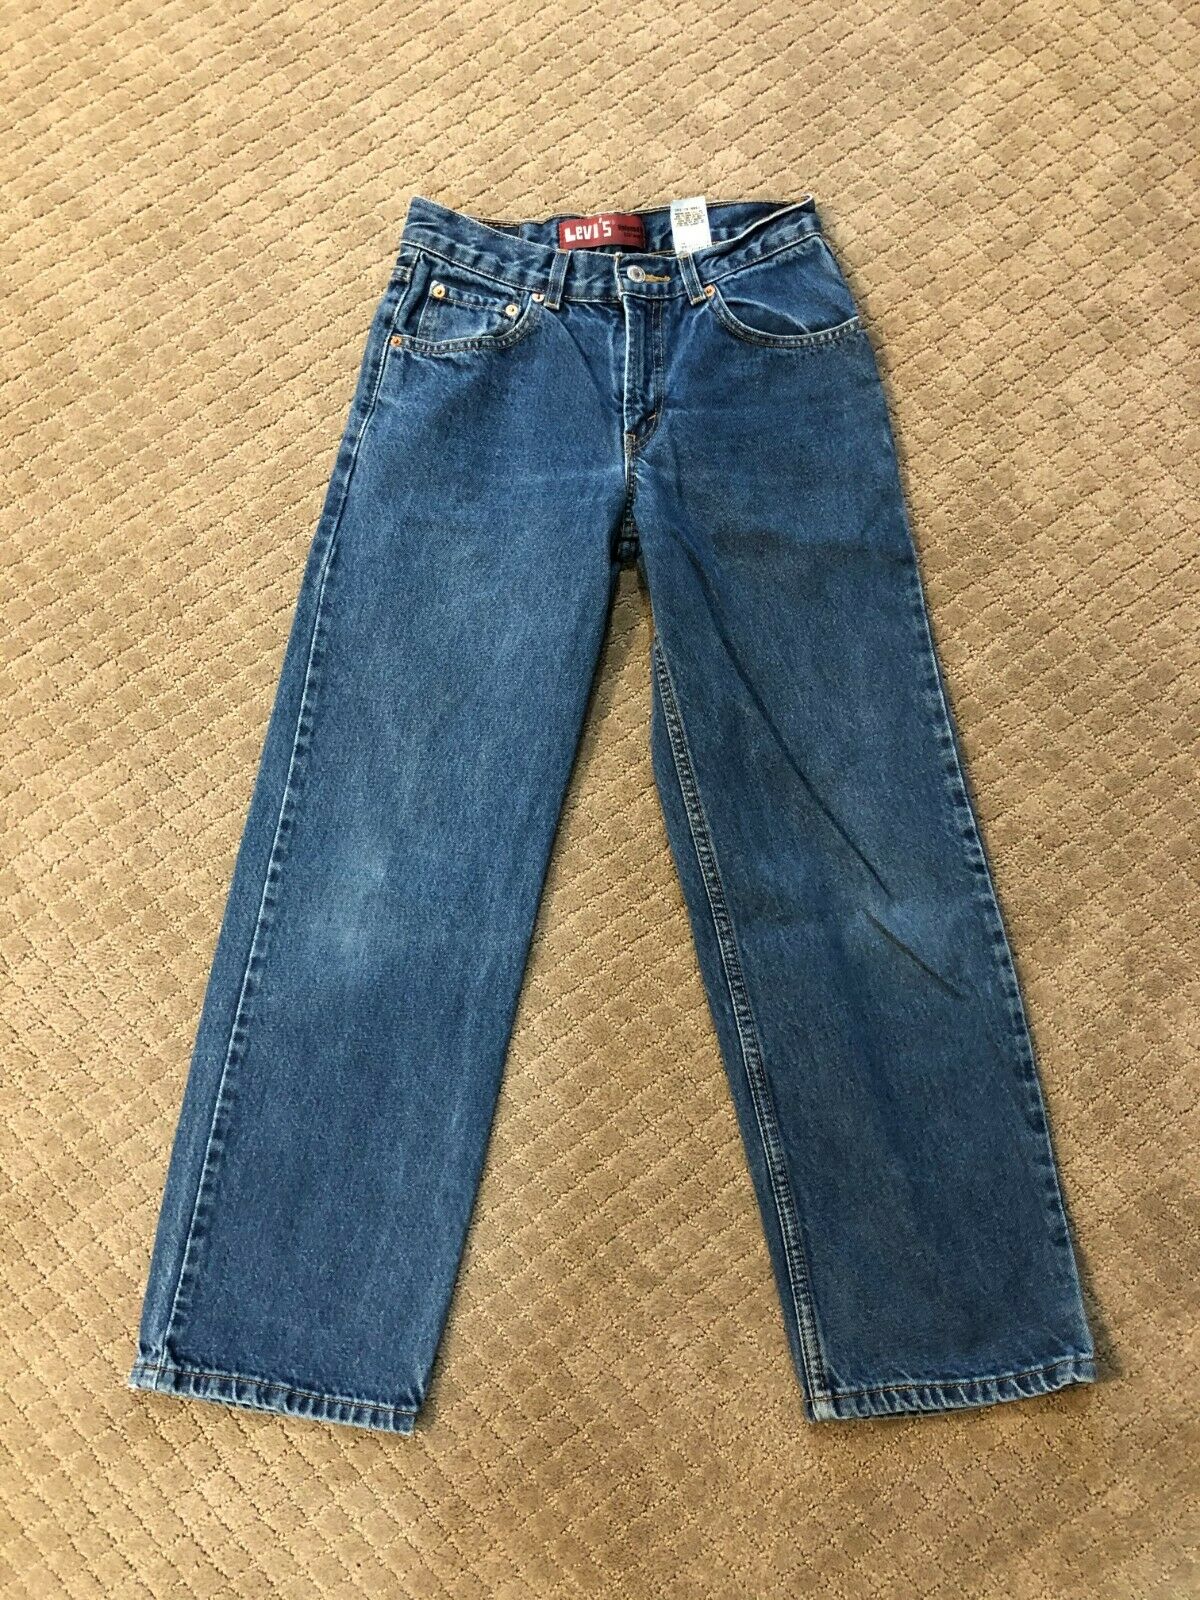 Vintage Levi's Boy 550 Relaxed Straight Blue Denim Jeans - Size 16 R (28x28)